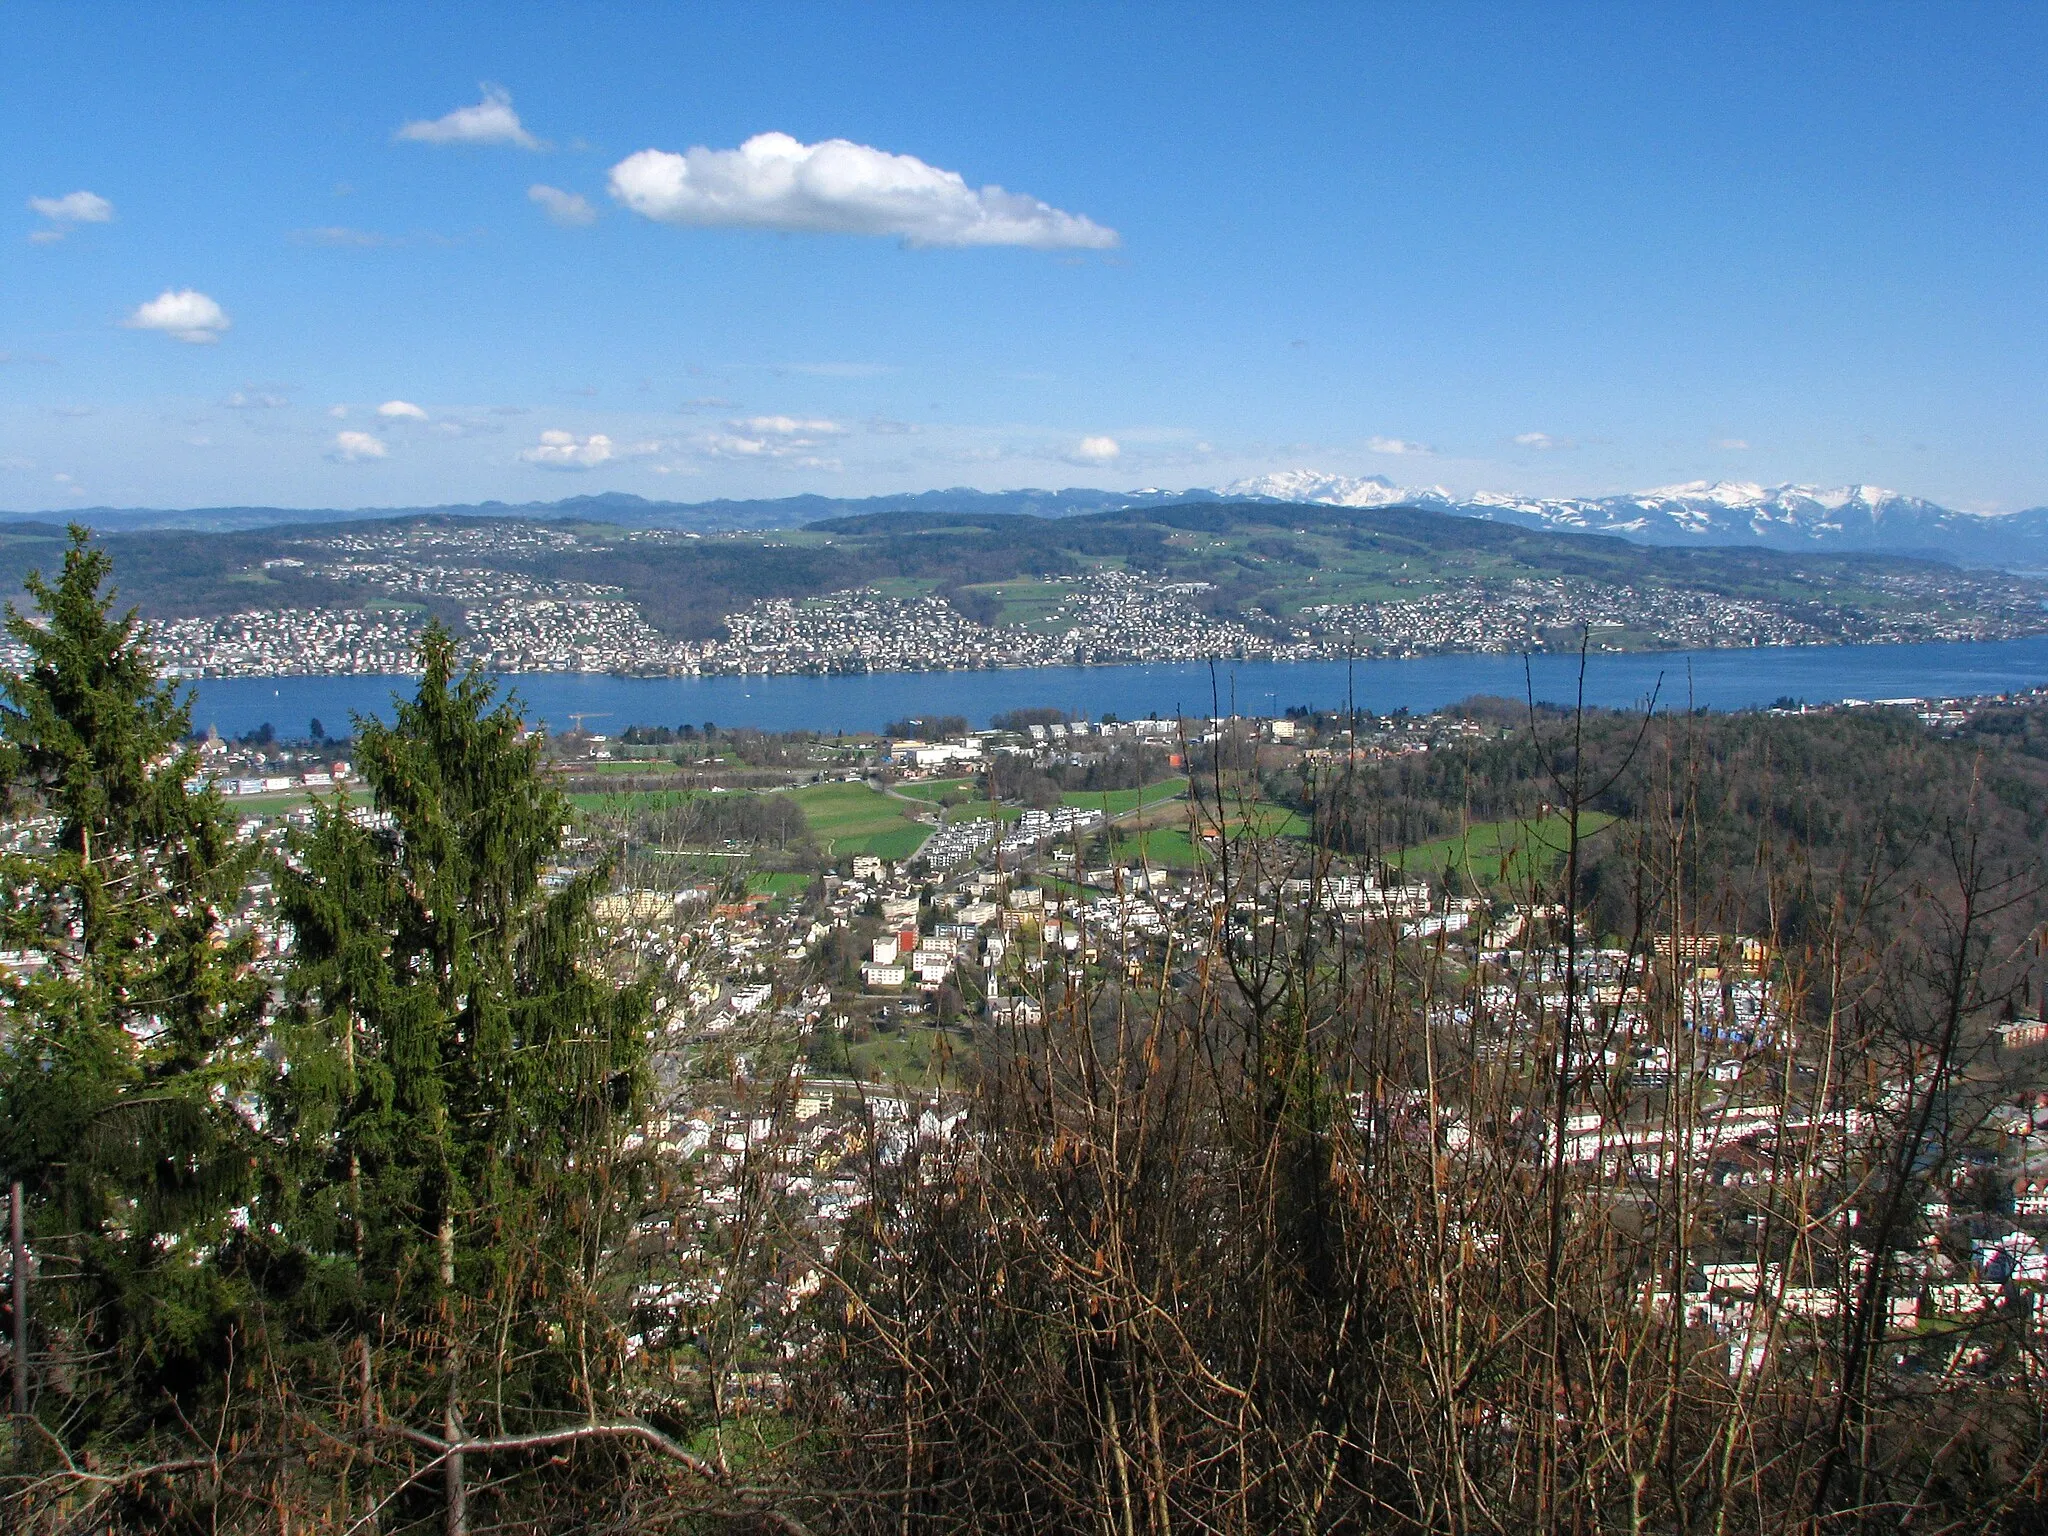 Photo showing: Sihl valley, Zimmerberg, Zürichsee, Küsnacht, Forch (to the left) and Pfannenstile in the background, as seen from Felsenegg.